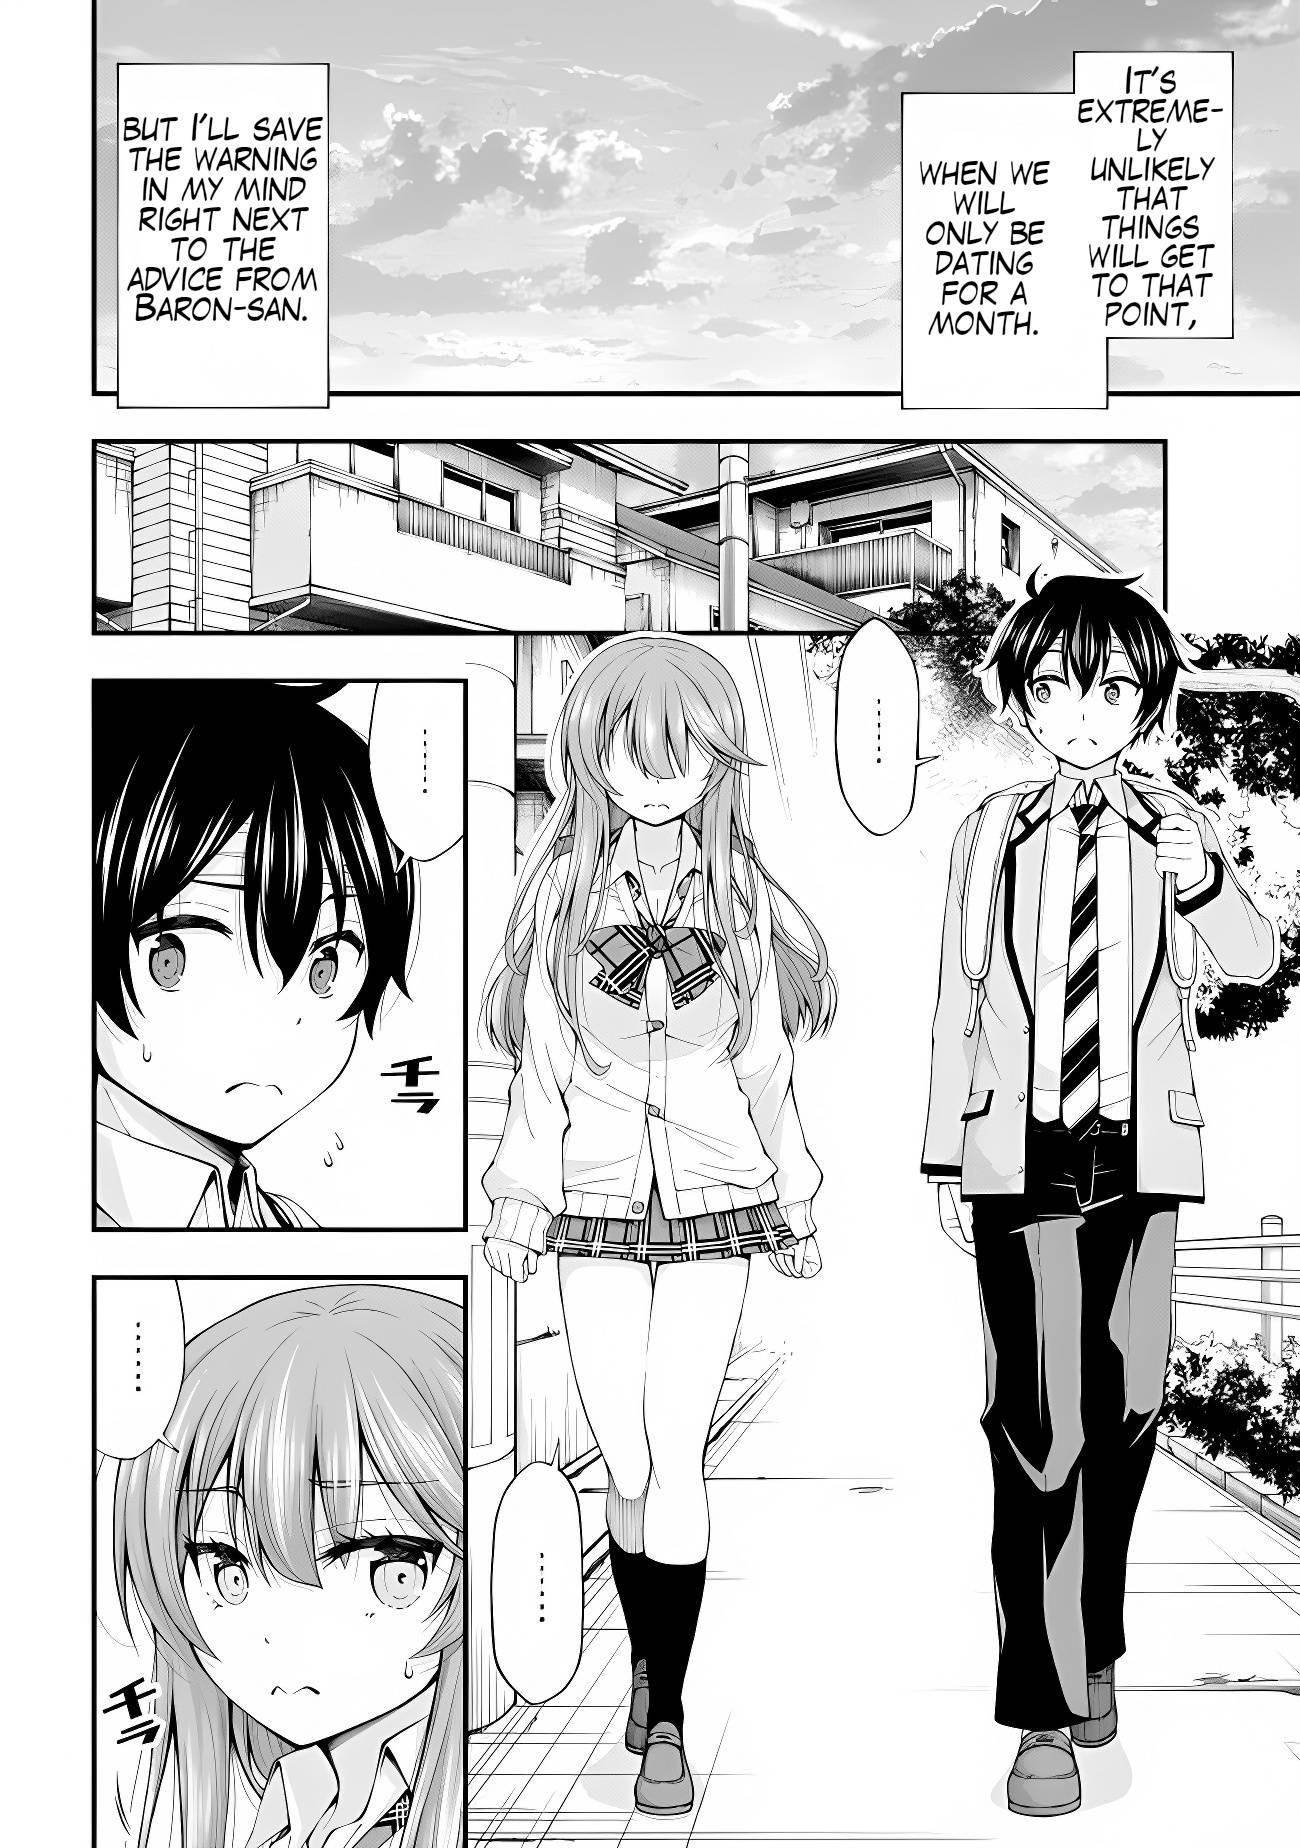 The Gal Who Was Meant to Confess to Me as a Game Punishment - chapter 2 - #4